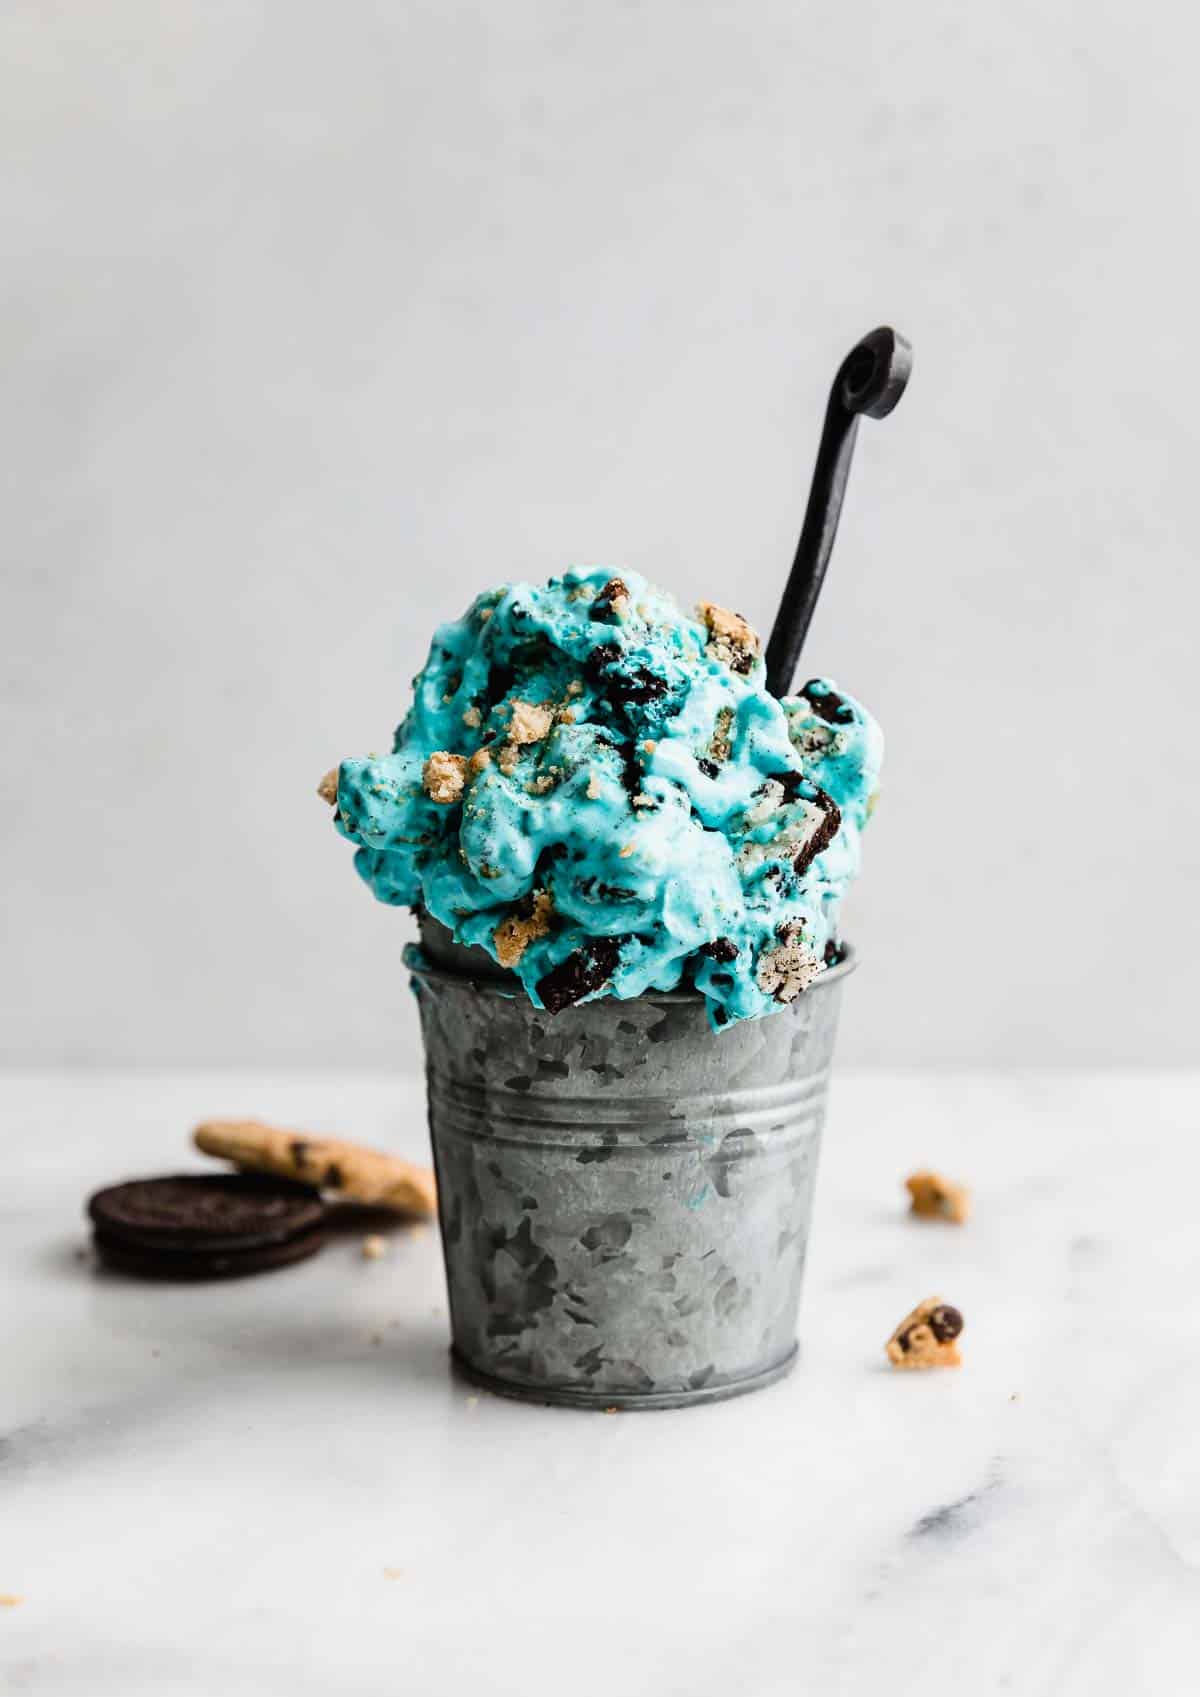 A metal cup filled with Cookie Monster Ice Cream against a white background.